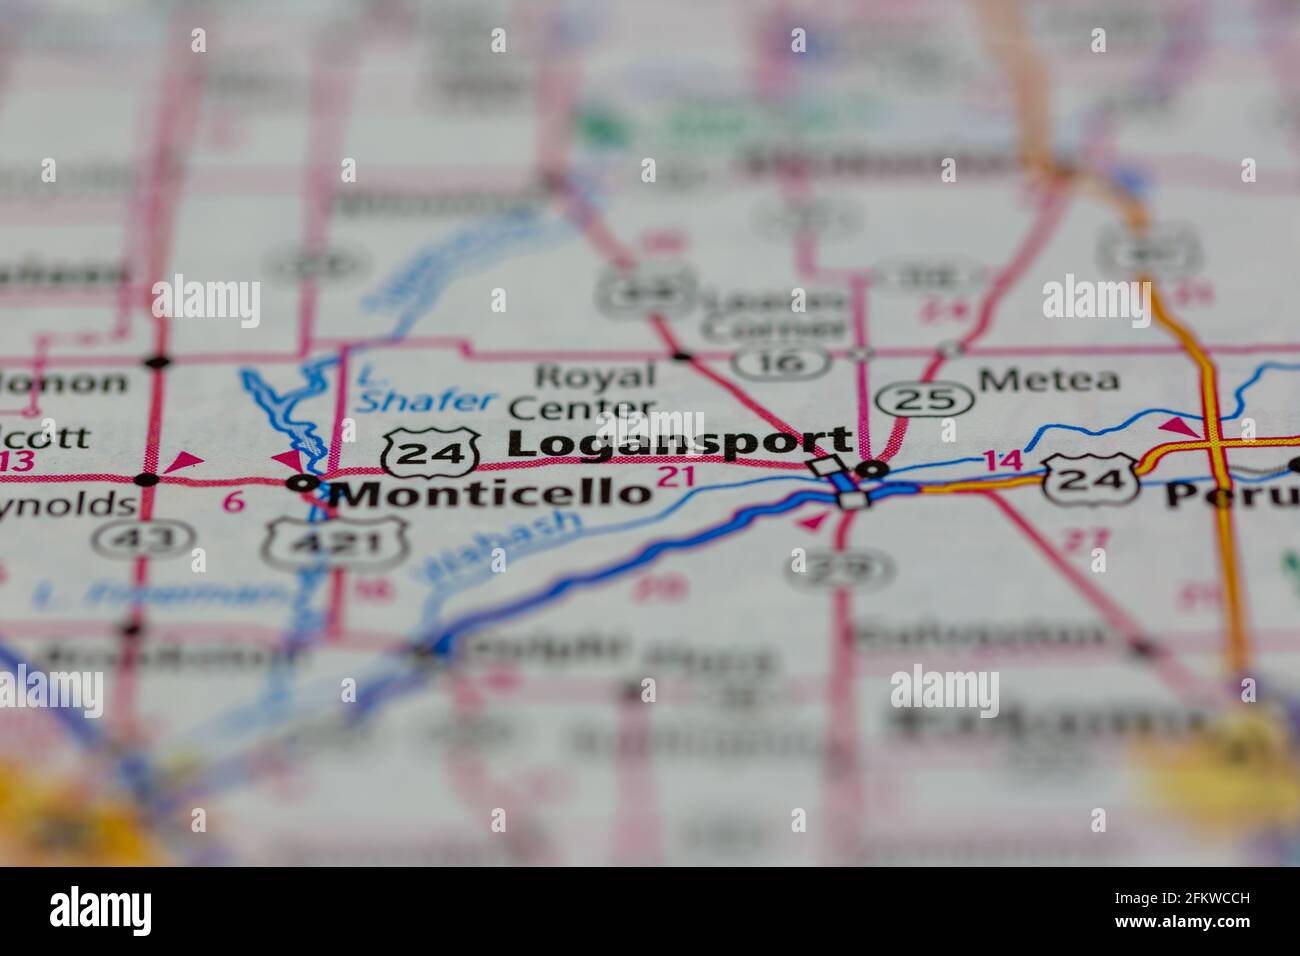 Logansport Indiana Usa Shown On A Geography Map Or Road Map 2FKWCCH 